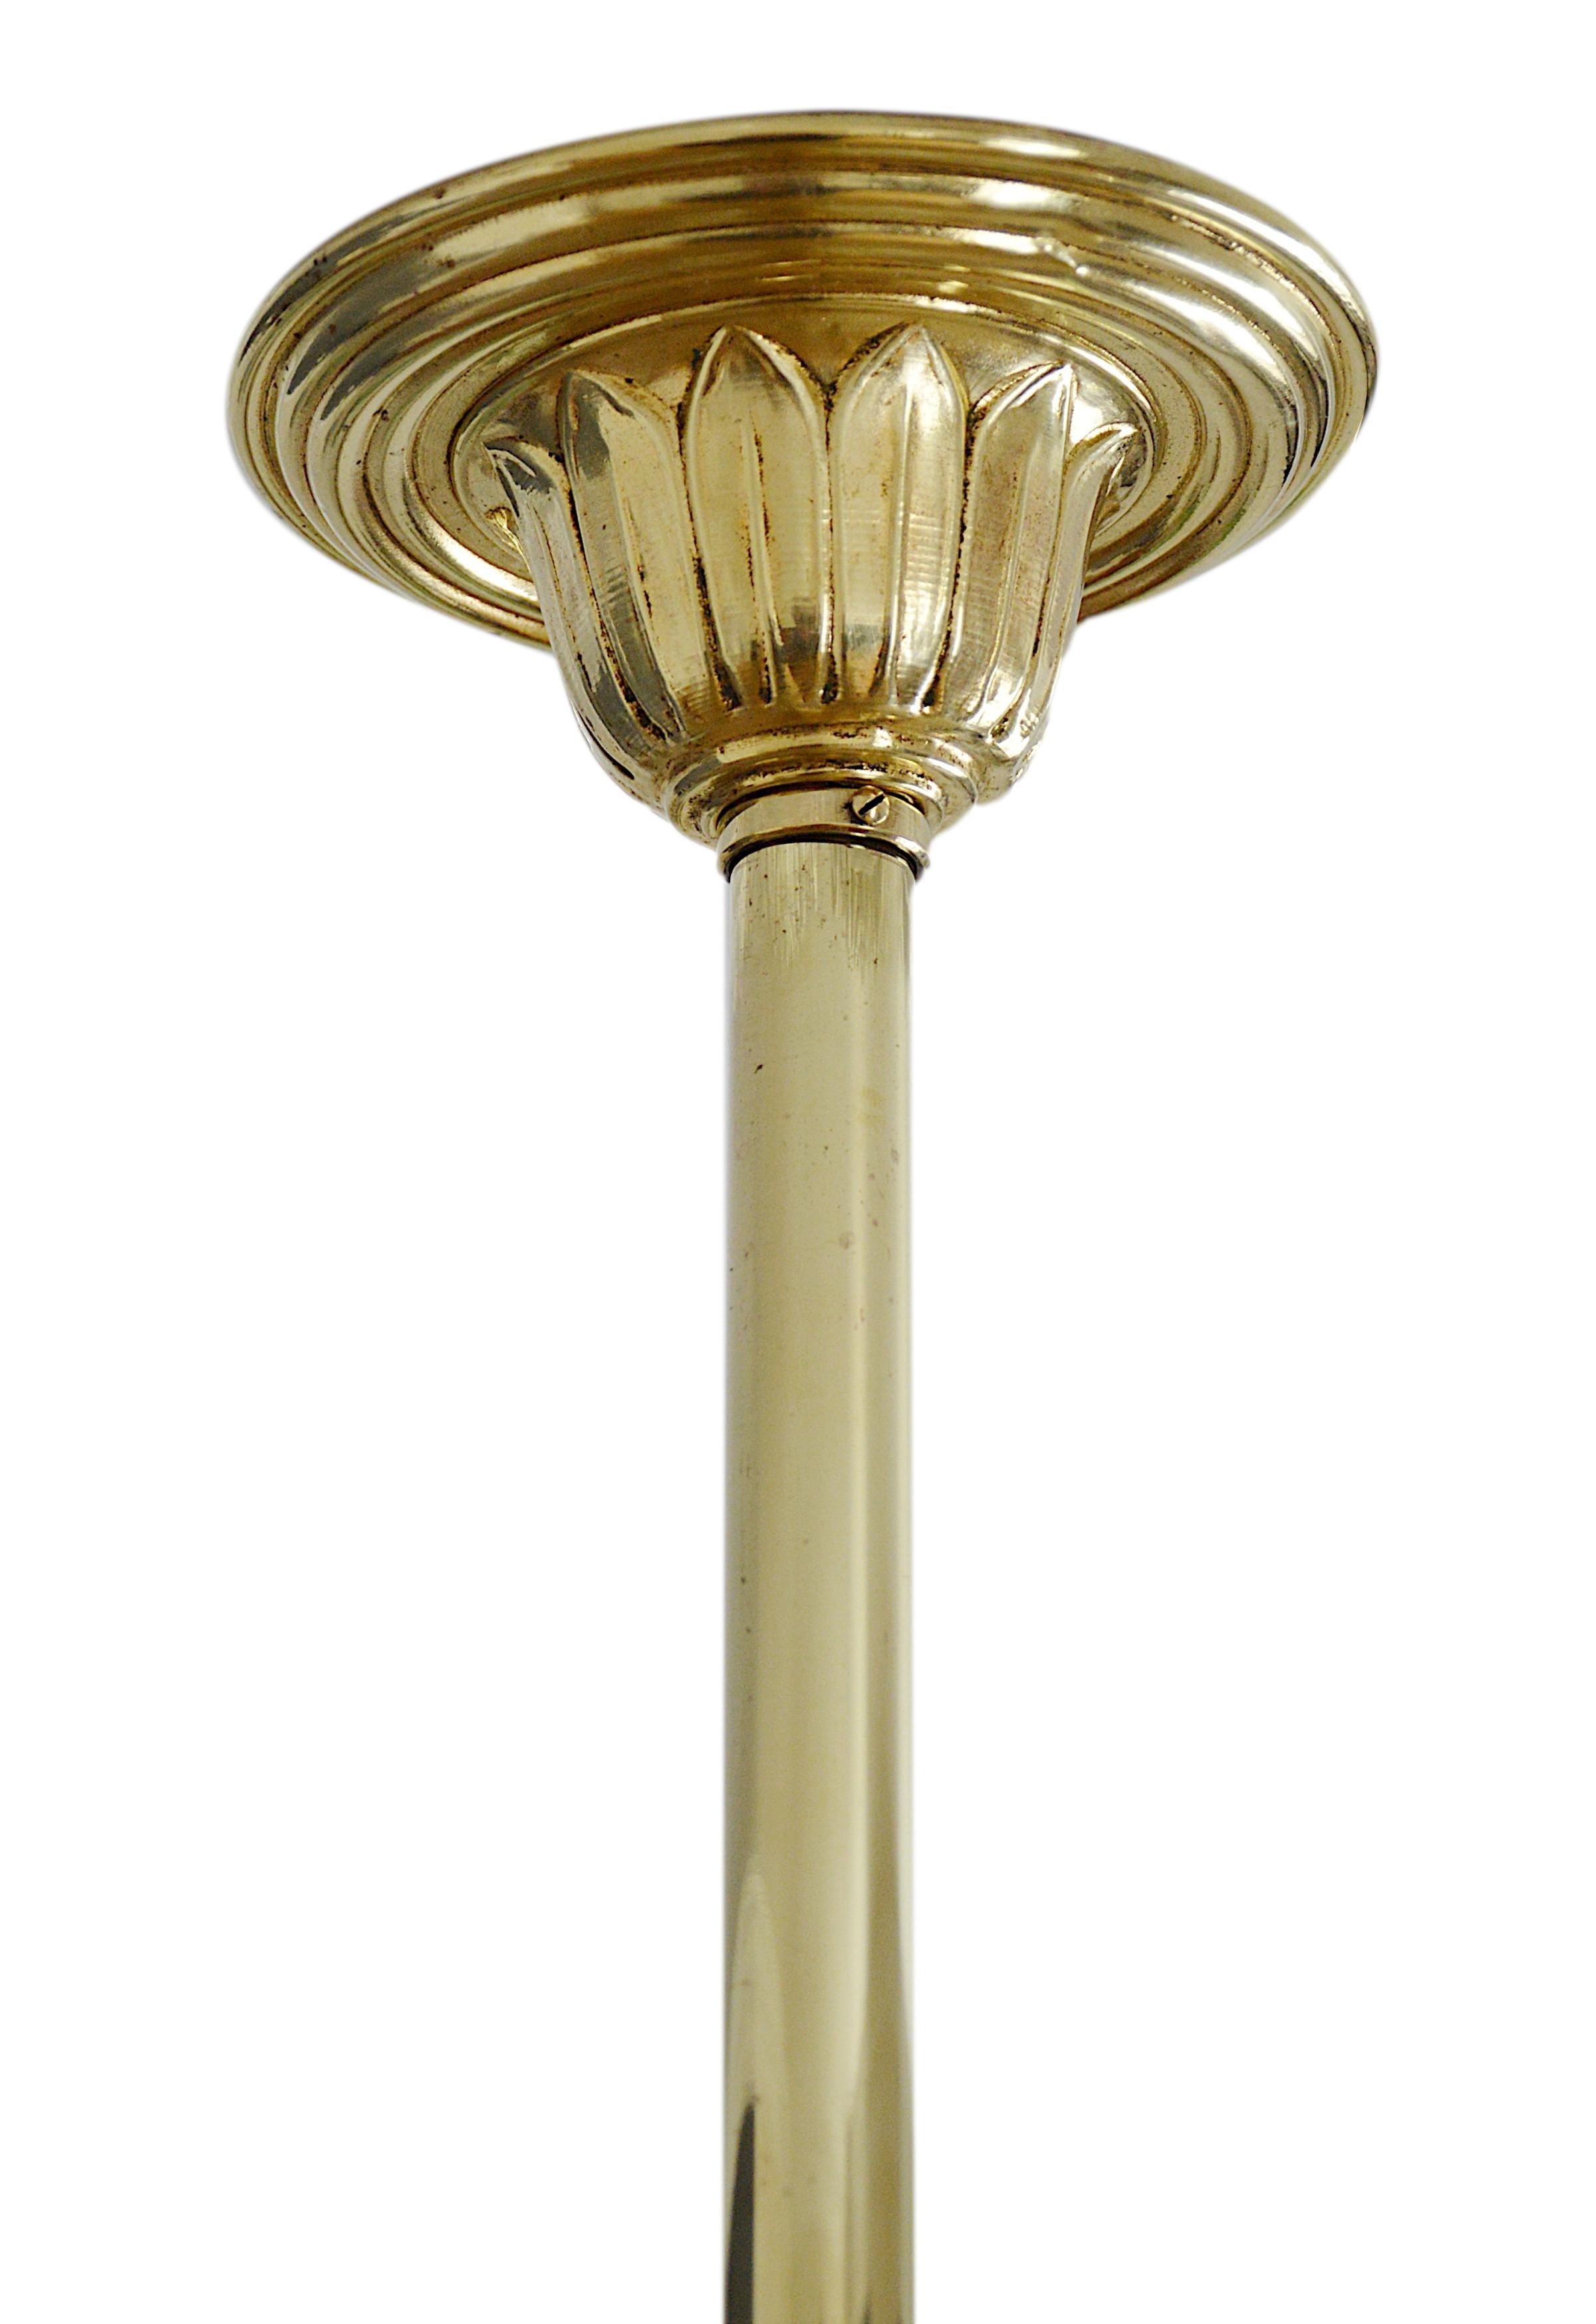 French Art Deco pendant chandelier by Georges Béal at VERLYS (Les Andelys), France, late 1920s. 